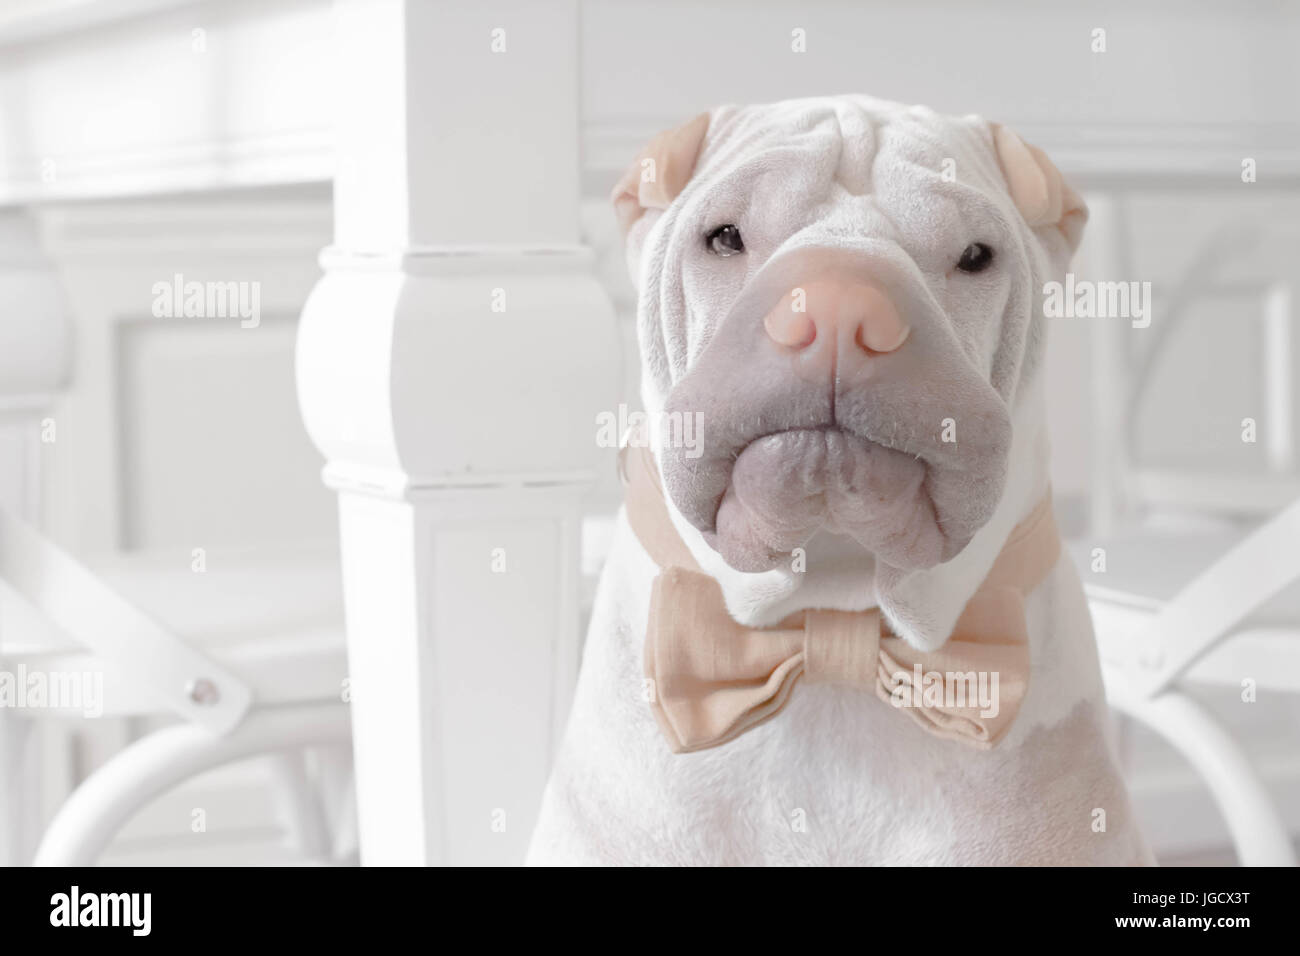 shar-pei dog wearing a bow tie Stock Photo